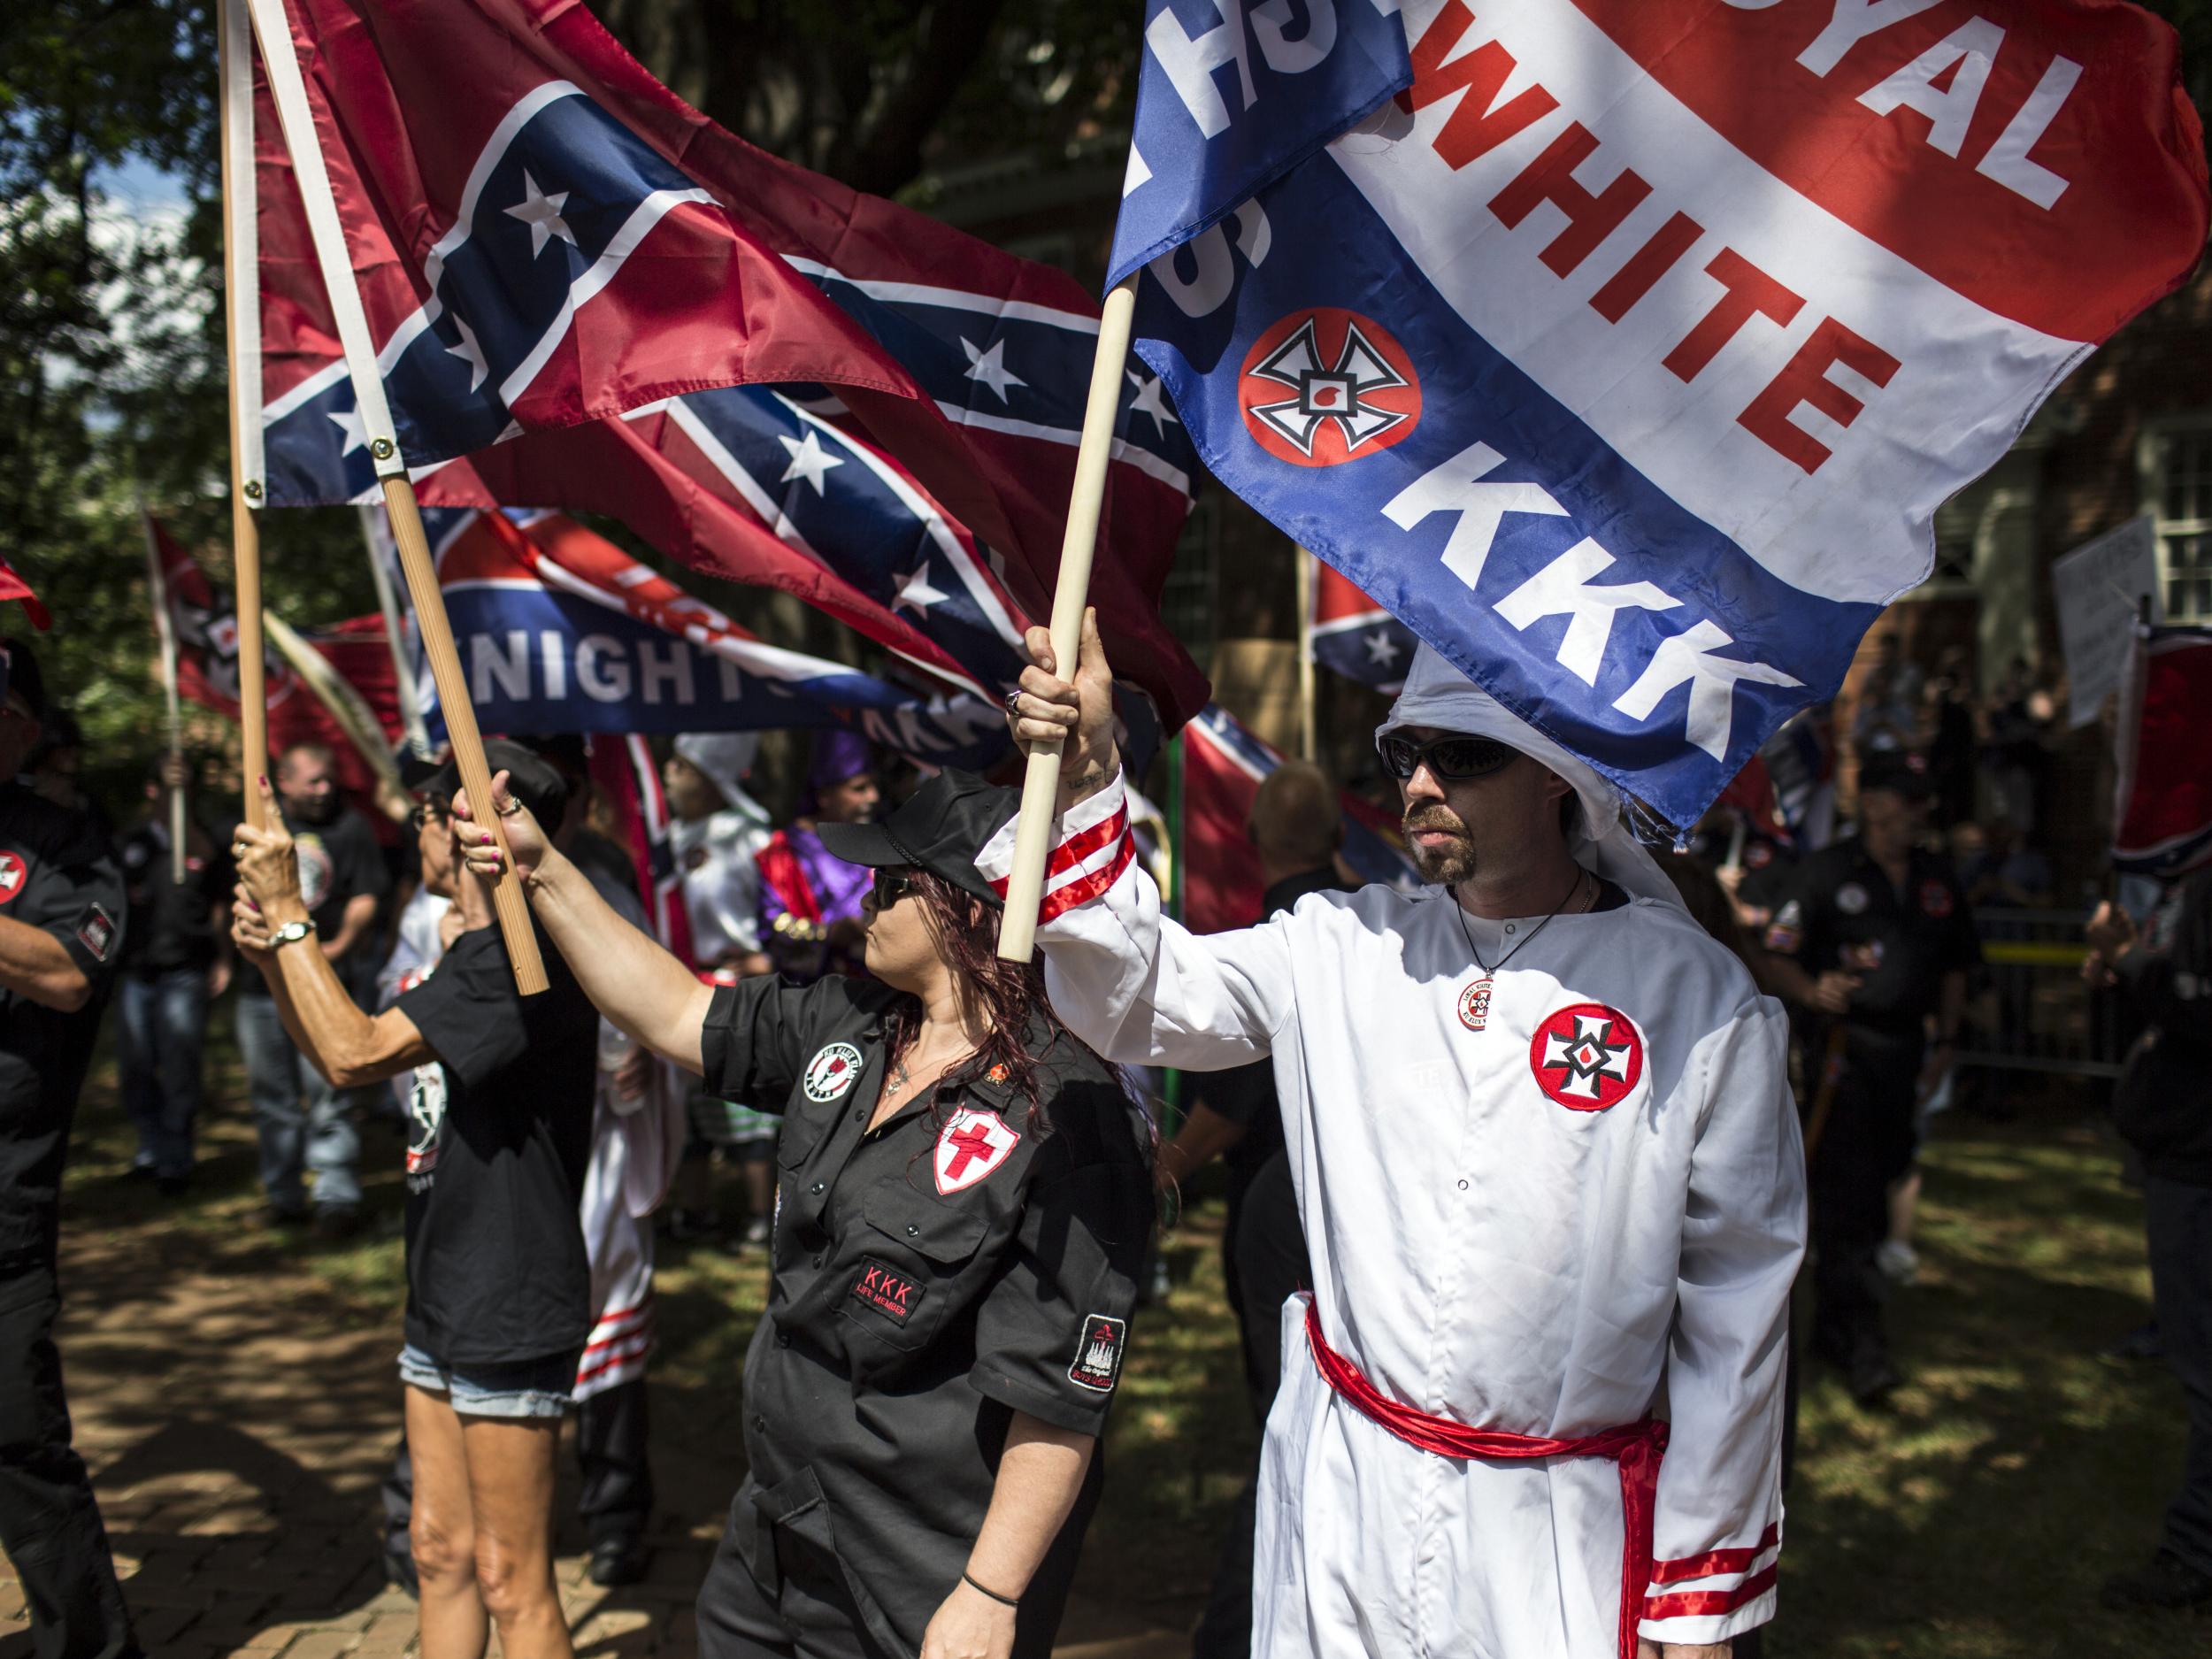 Donald Trump failed to condemn white supremacists in his initial response to the violence in Charlottesville